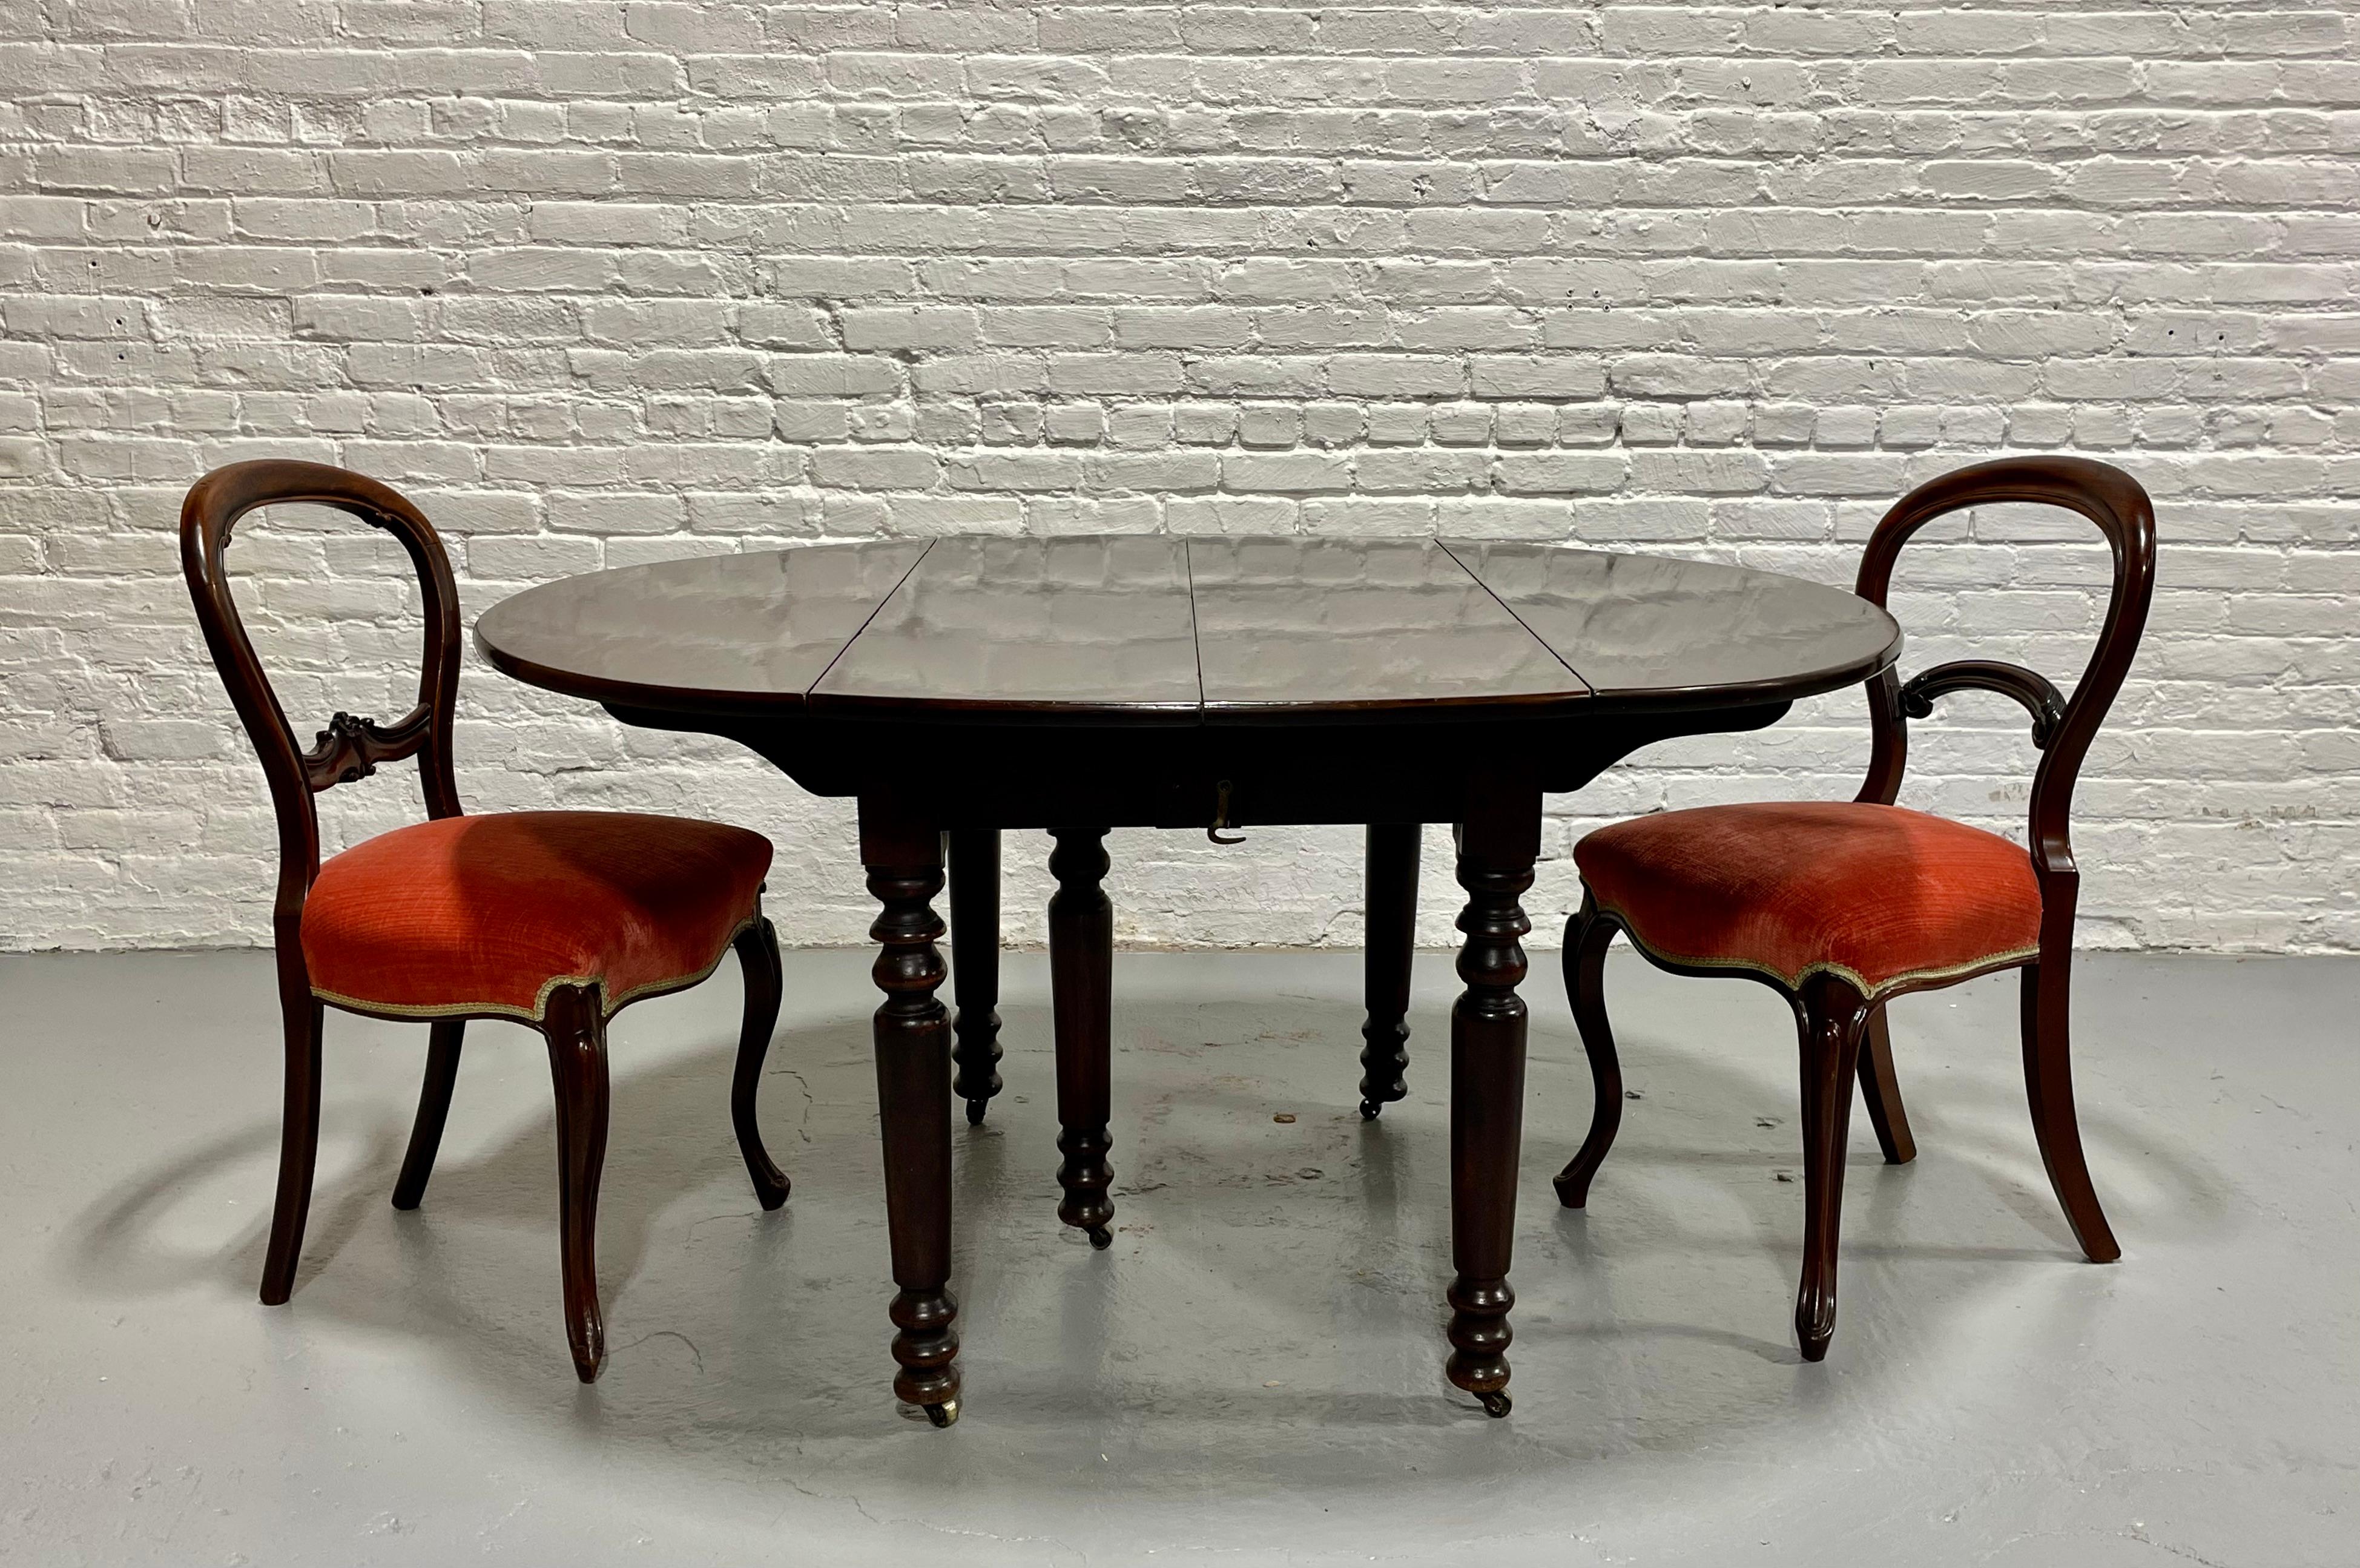 Antique Drop Leaf Expandable Mahogany Oval Dining Table, c. 1910 For Sale 2